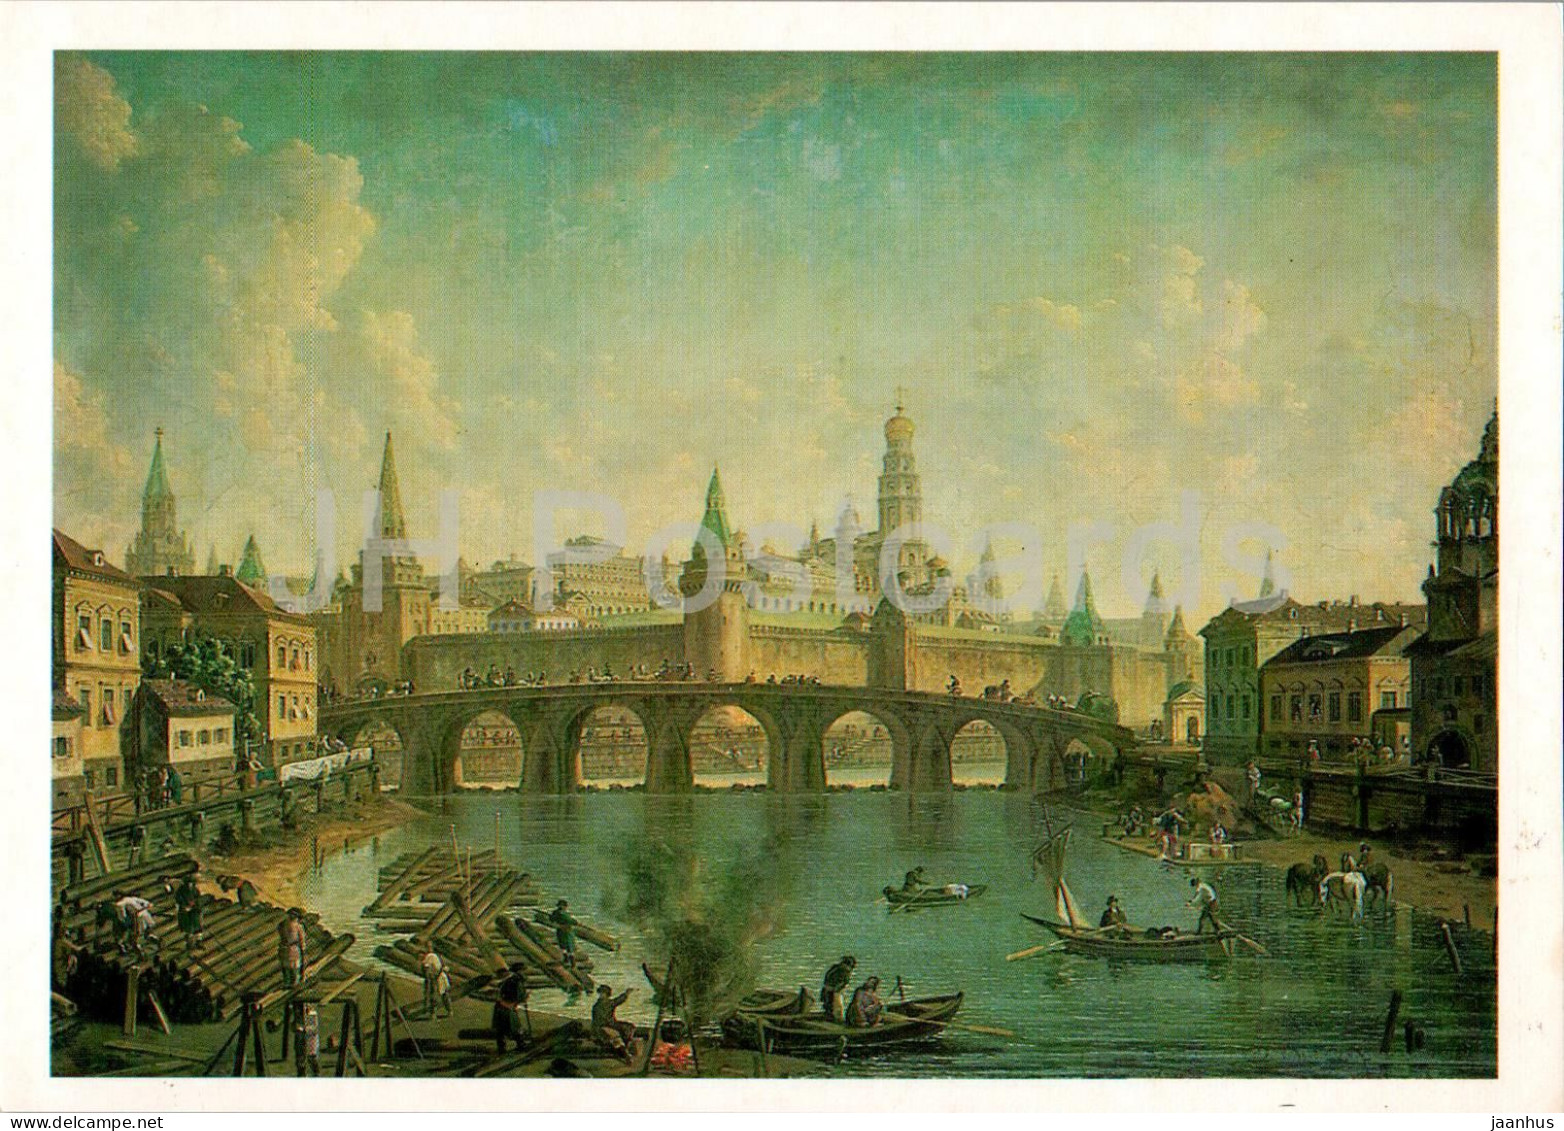 Painting By F. Alexeyev - View Of The Moscow Kremlin And The Stone Bridge - Russian Art - 1987 - Russia USSR - Unused - Paintings